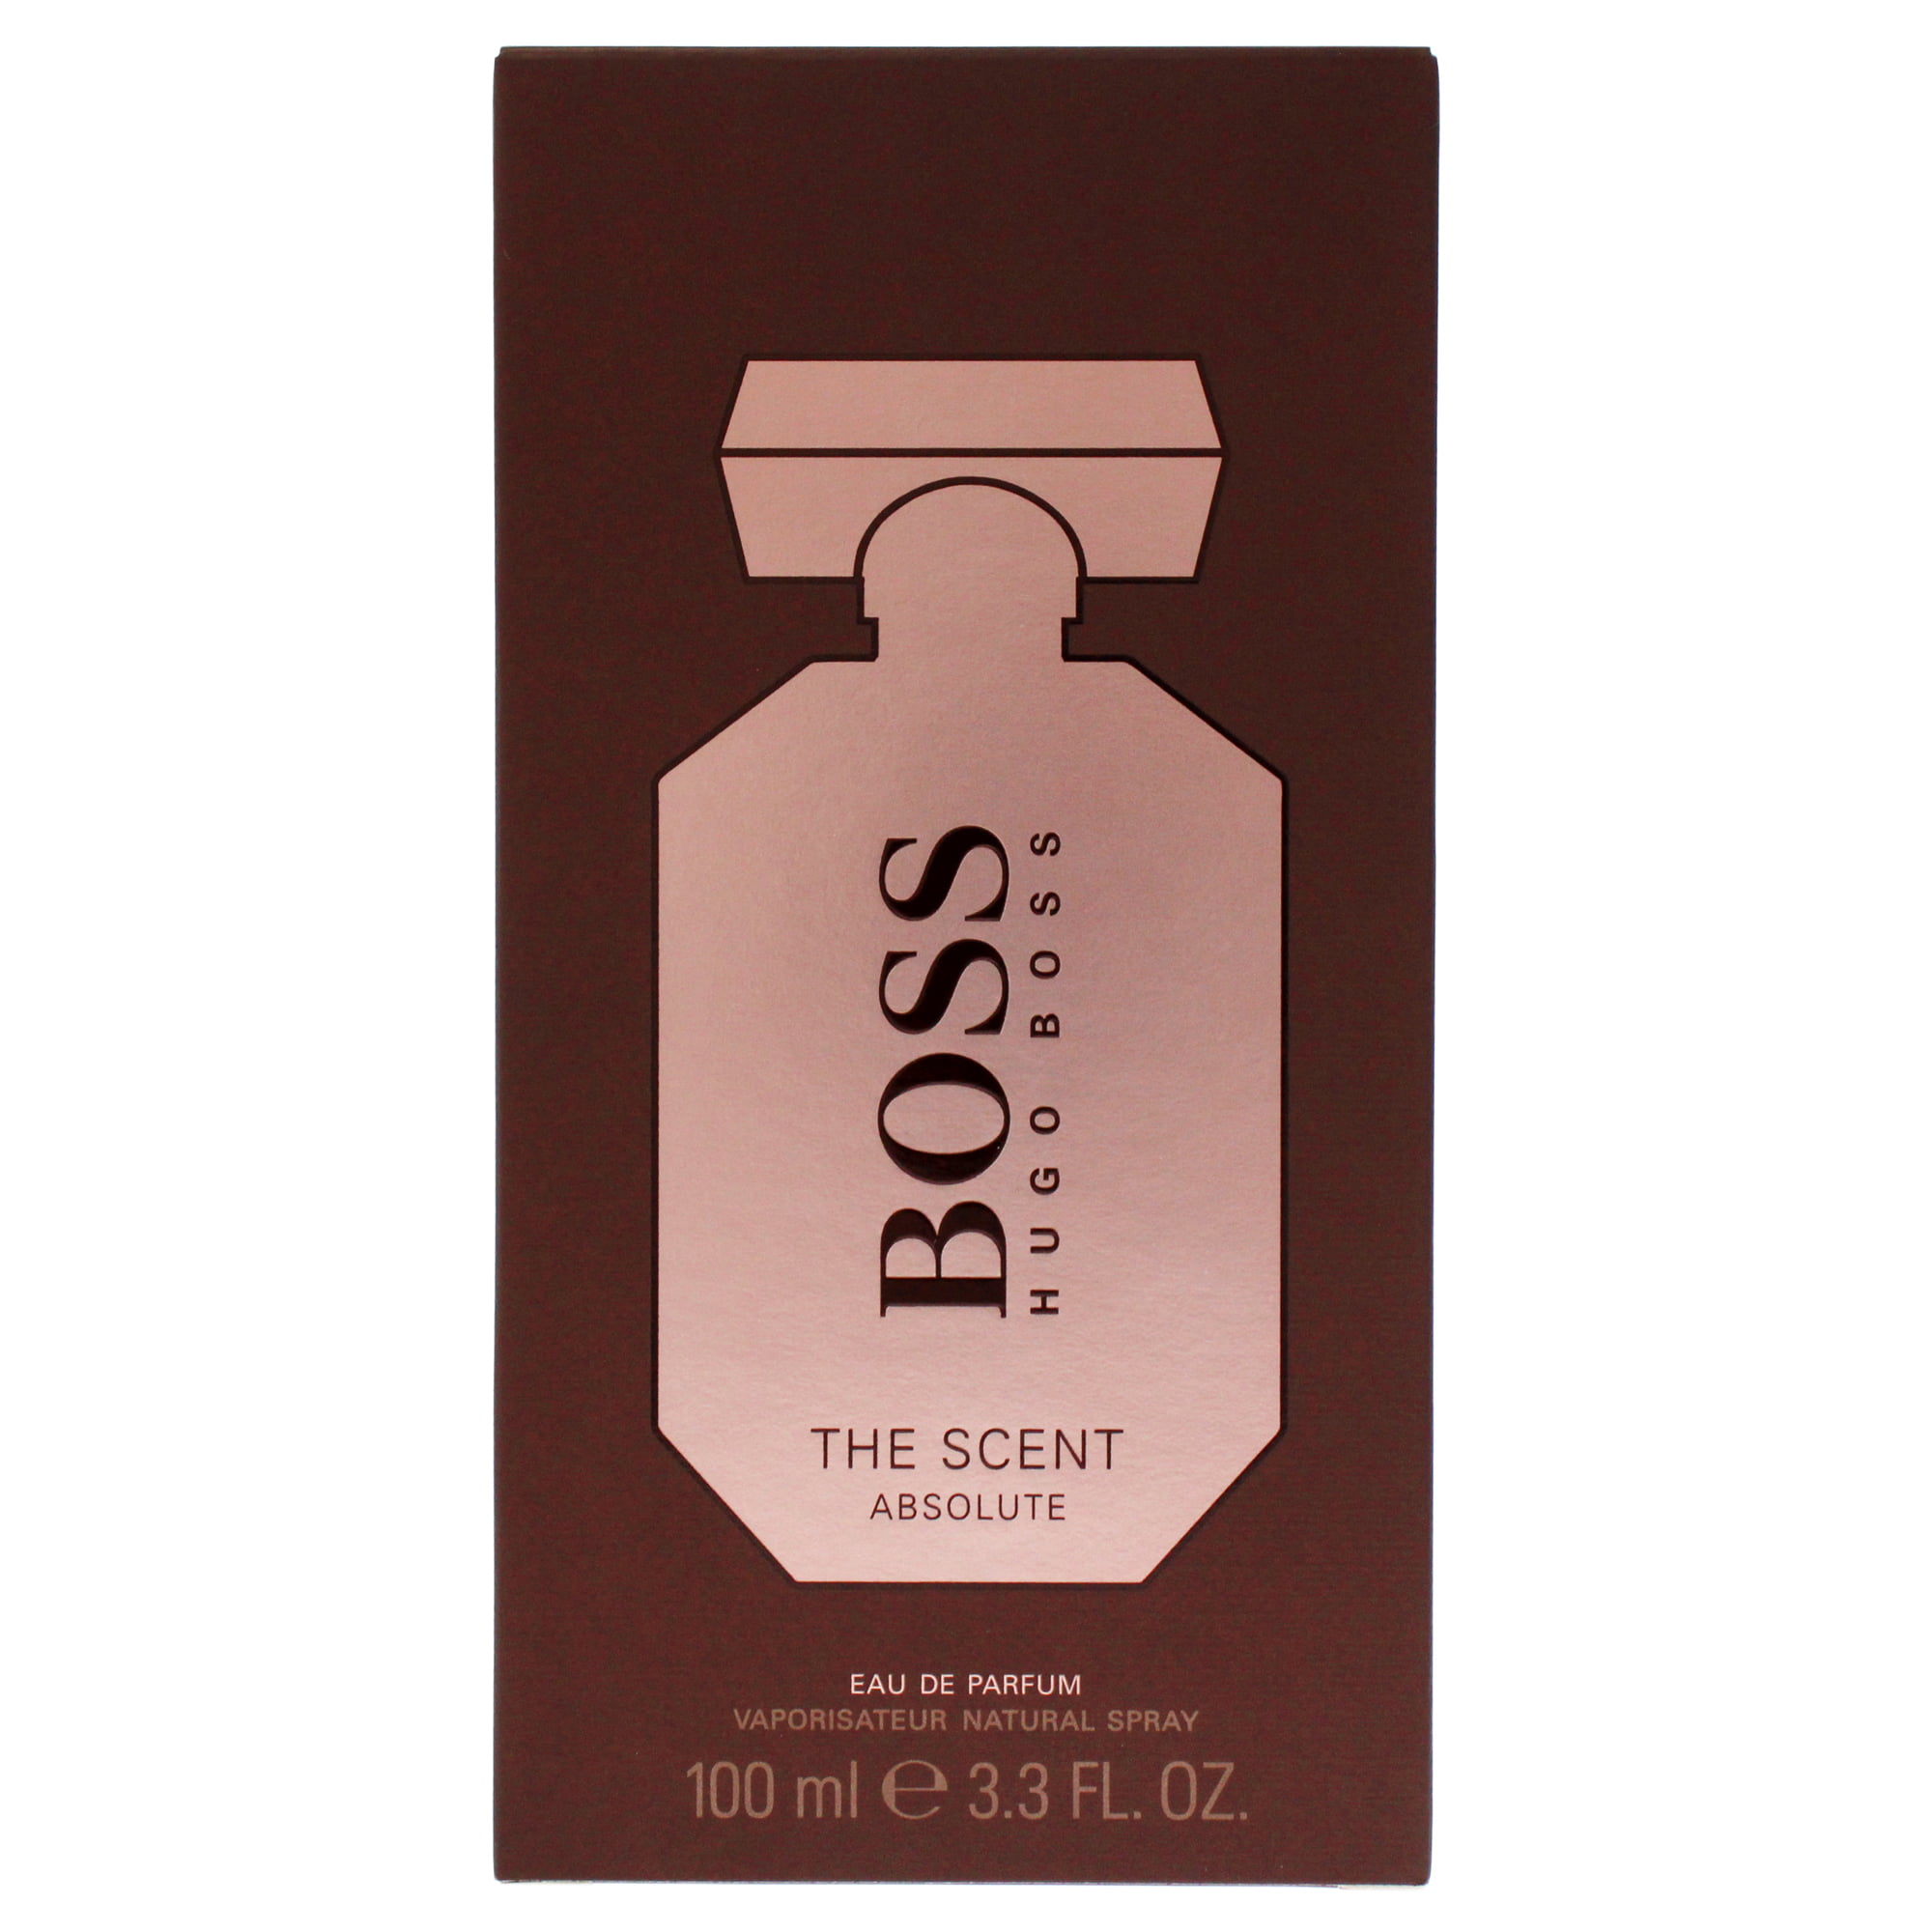 The scent absolute. Boss the Scent absolute. Парфюмерная вода Hugo Boss the Scent absolute for her. The Scent absolute for her.